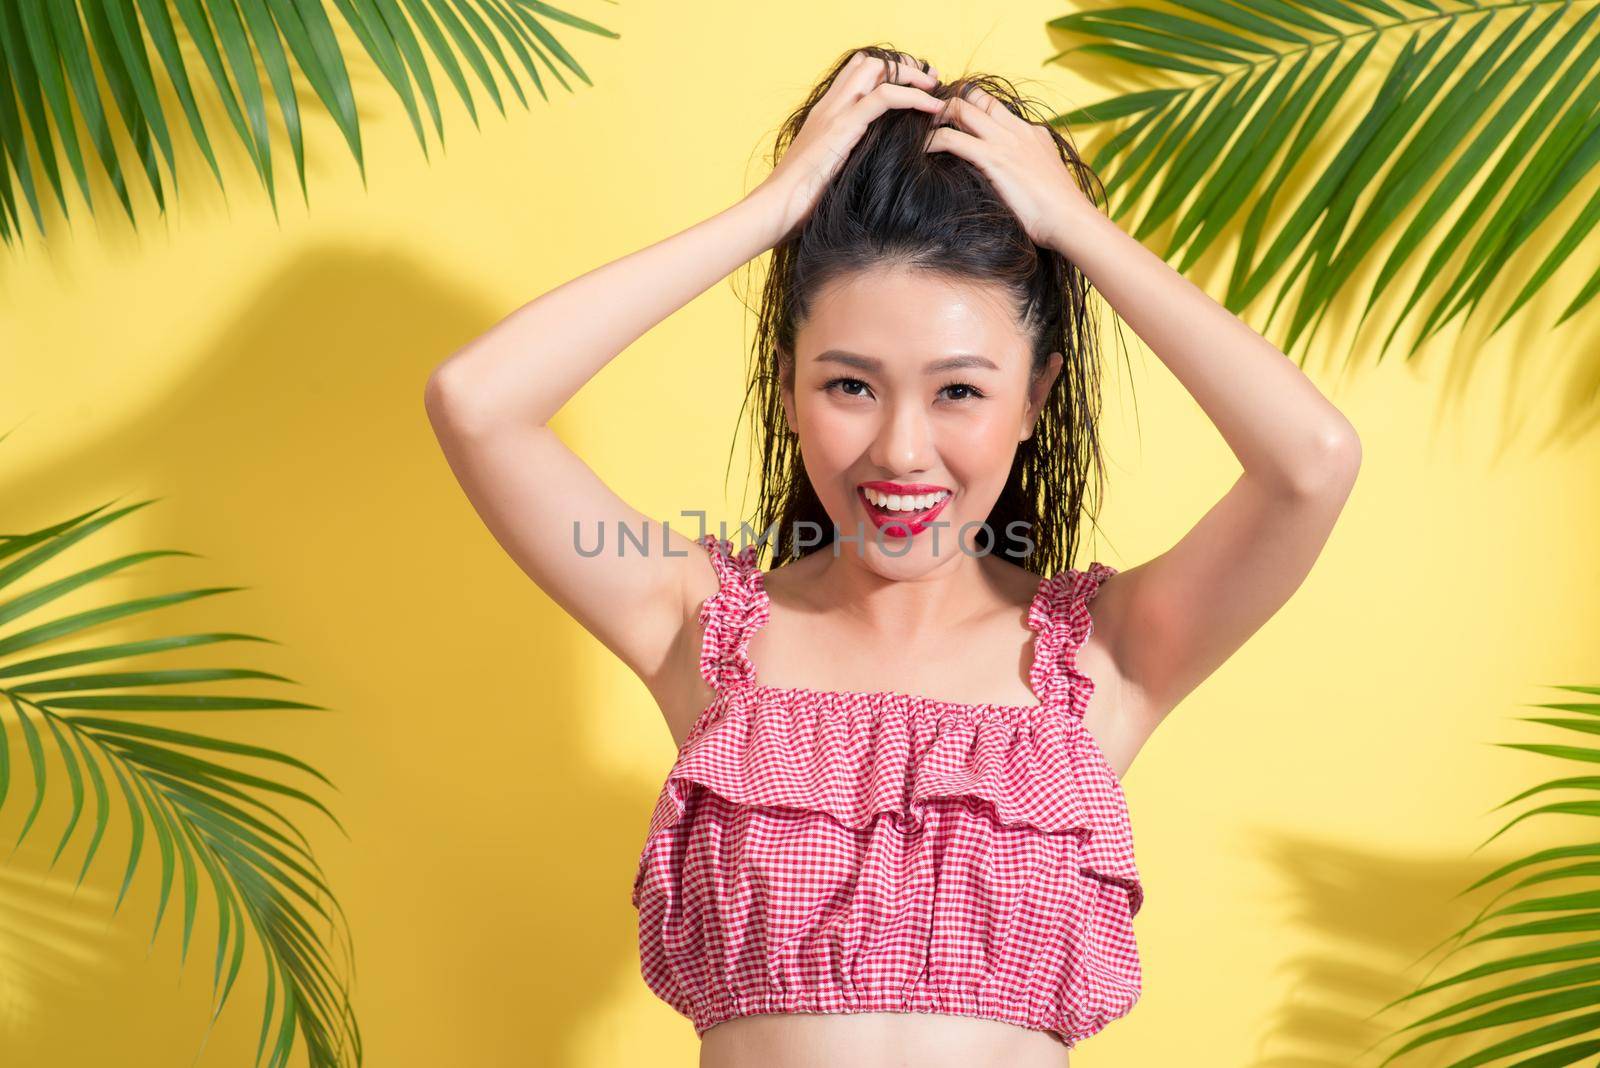 Summer fashion girl standing and smiling over vibrant yellow background